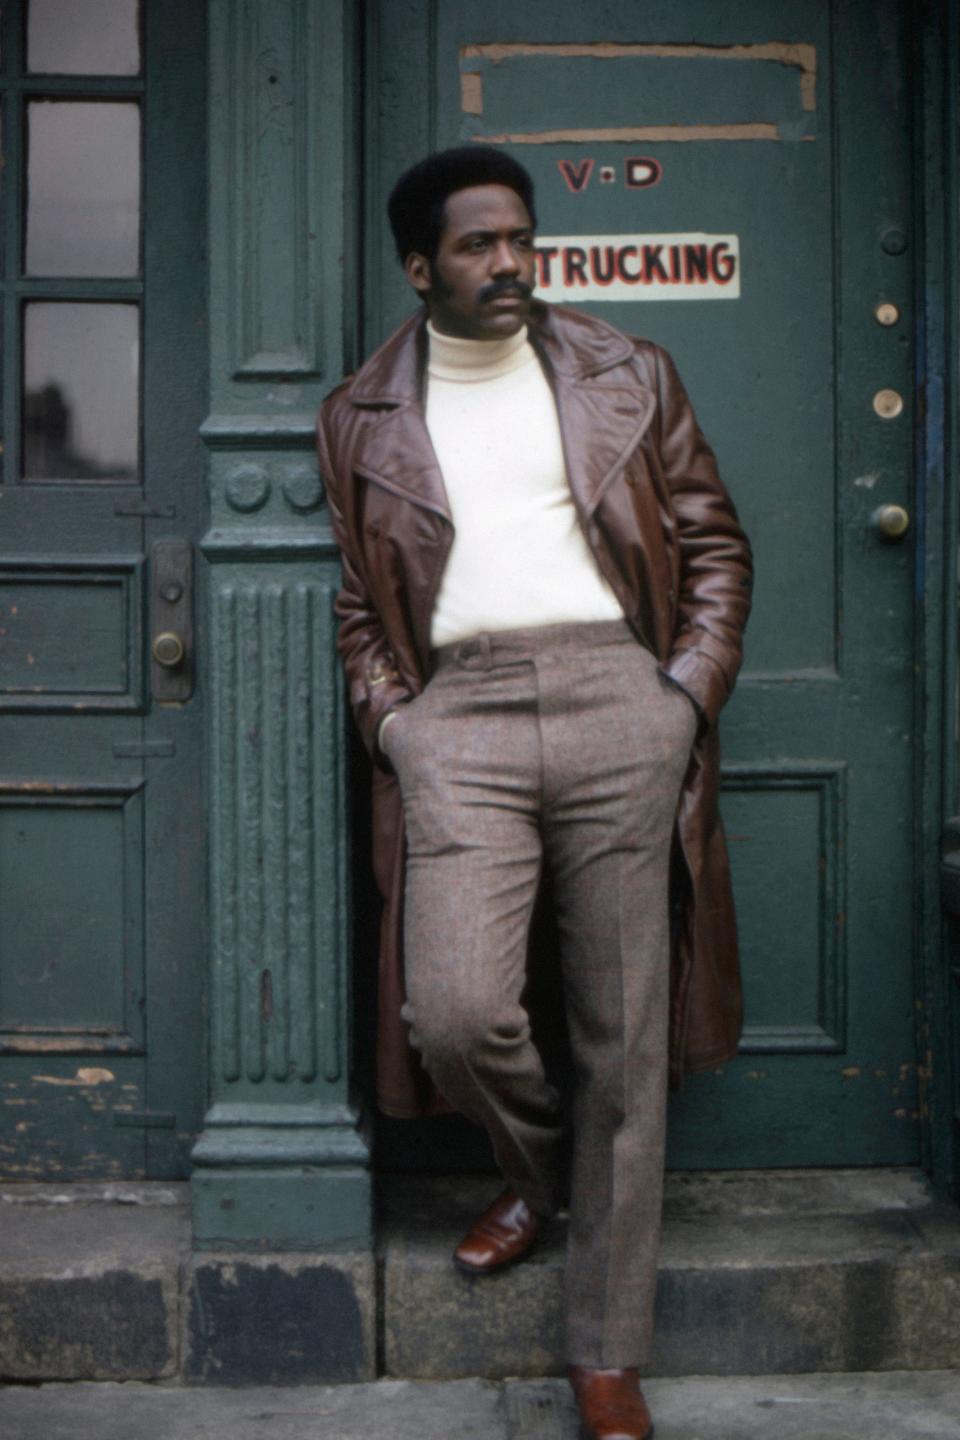 Richard Roundtree in a brown lether jacker leaning against a building